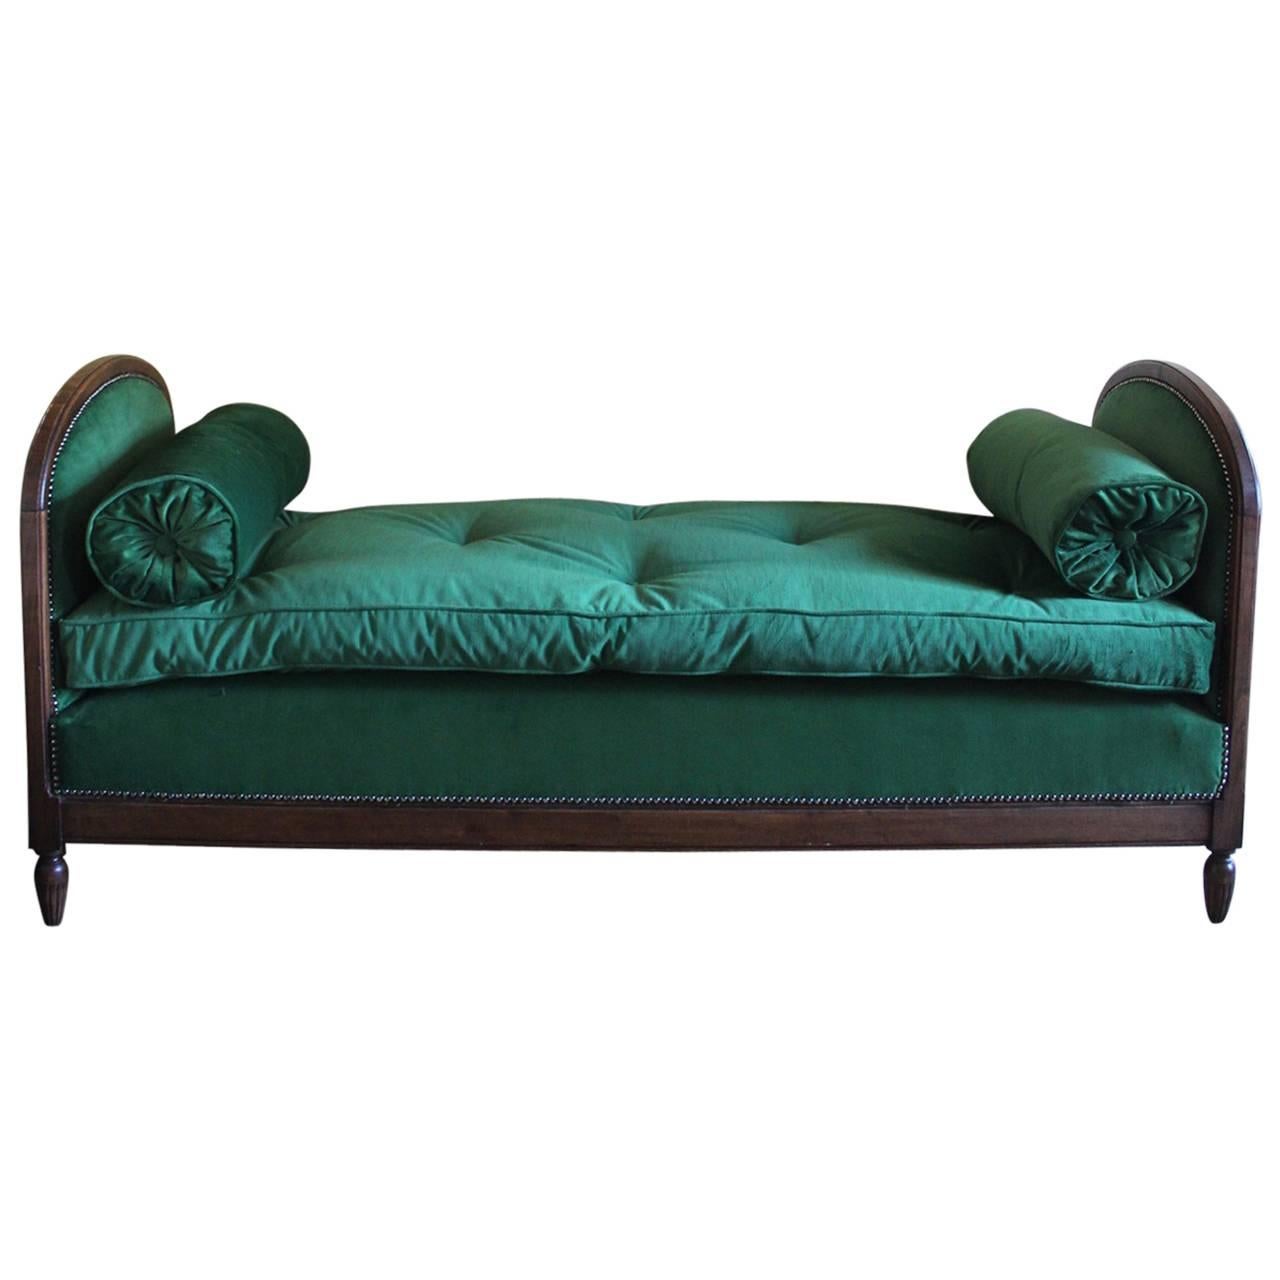 Early 20th Century French Art Deco Daybed Upholstered in Green Velvet